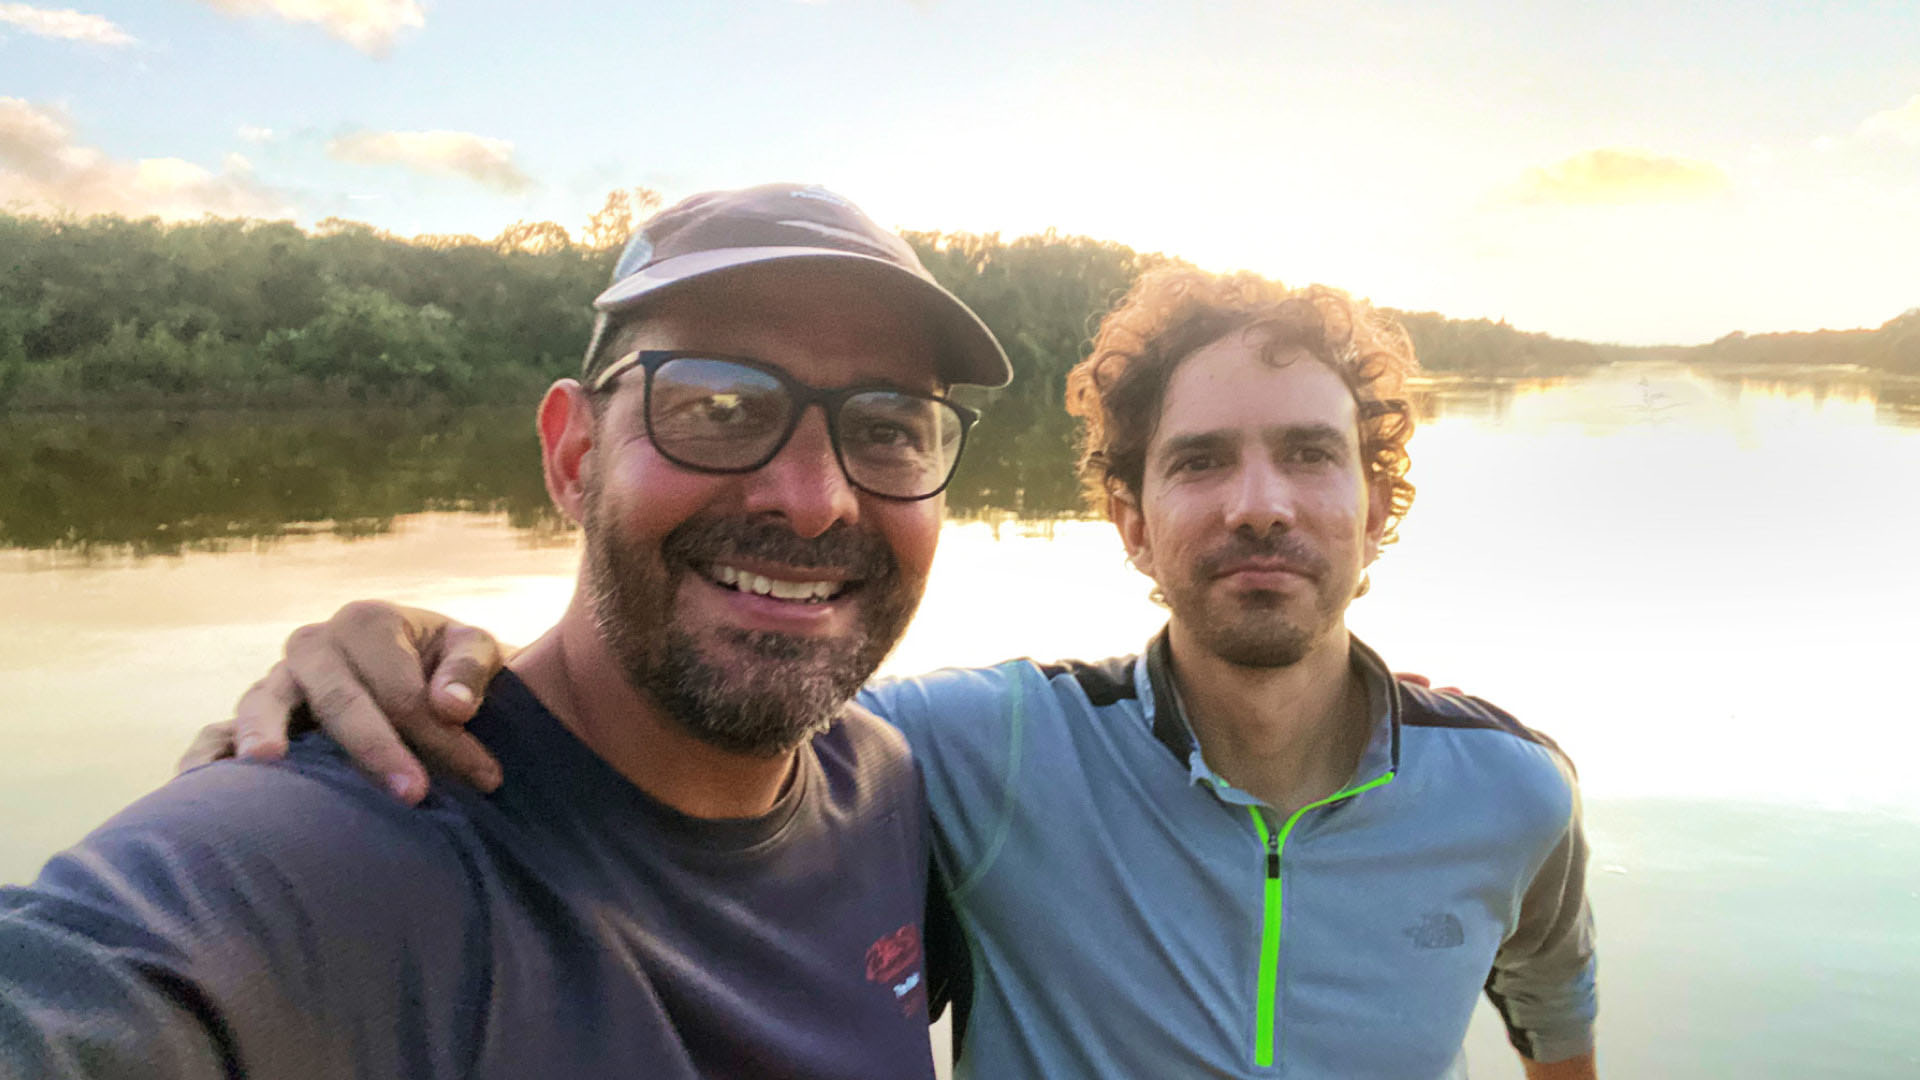 Selfie in front of a sun-reflecting river with Andrés wearing a cap and glasses, smiling next to Carlos, who is leaning on the edge of the boat with an arm around Andrés